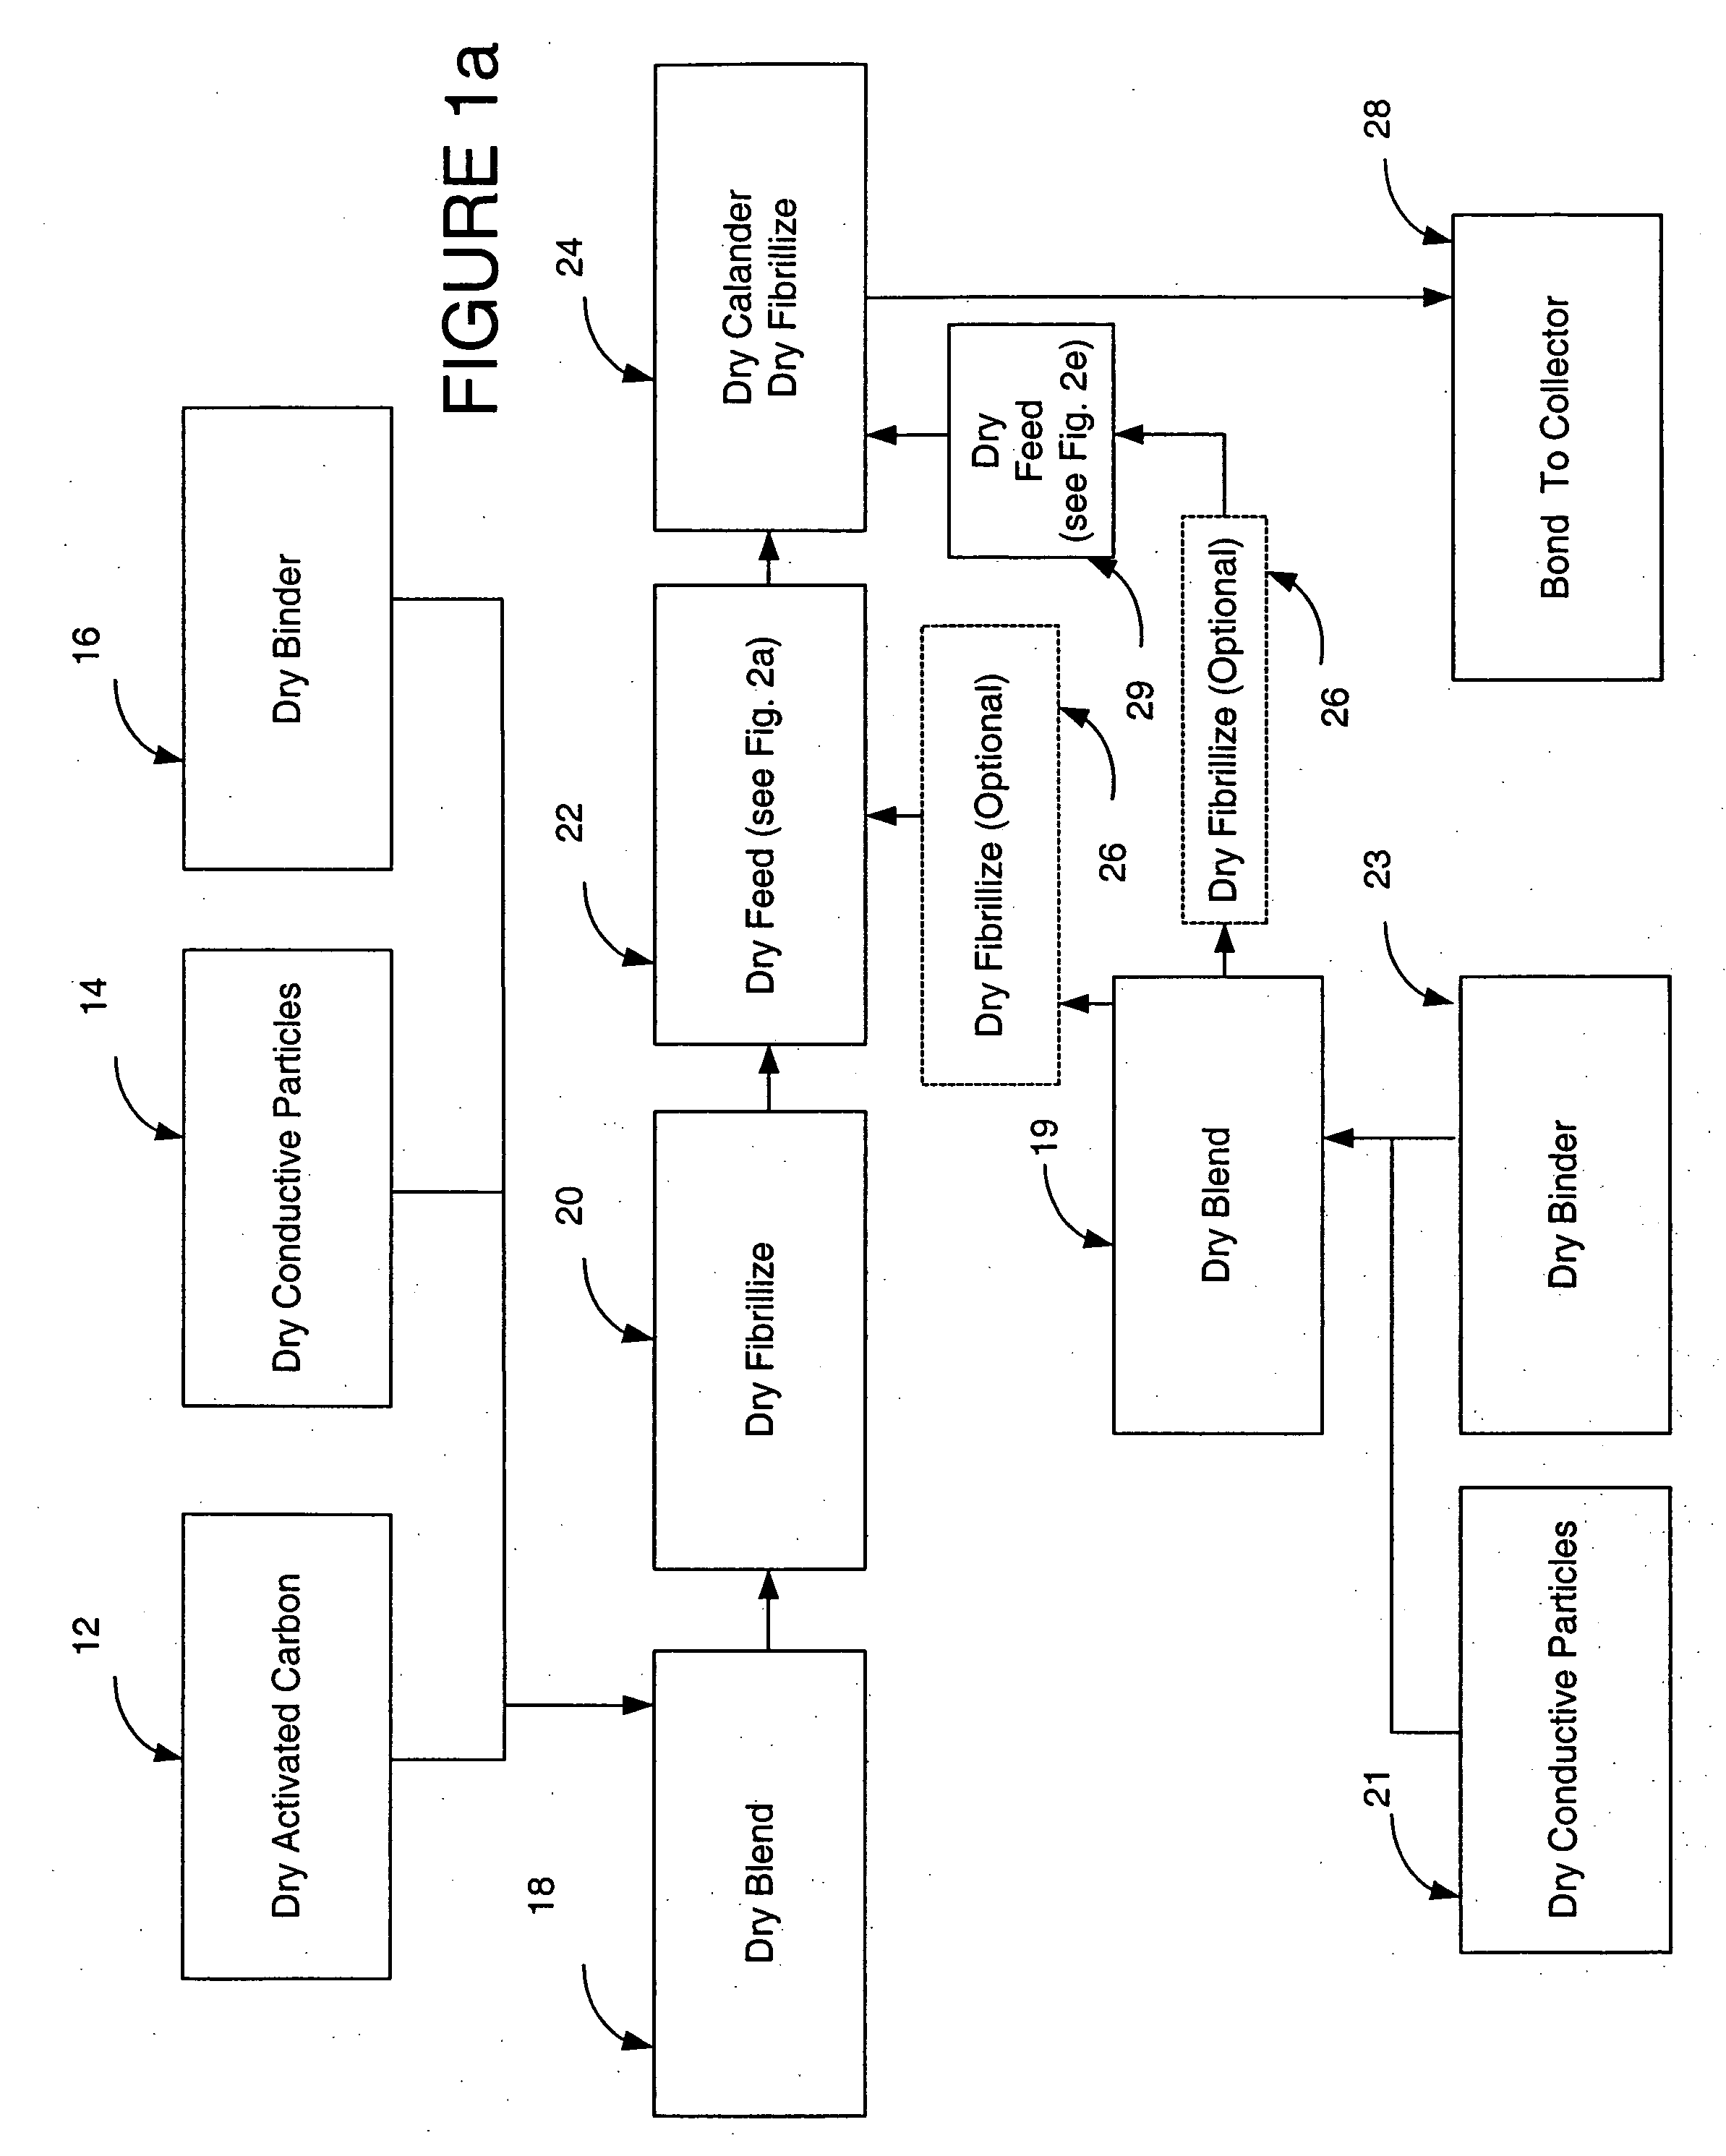 Dry particle packaging systems and methods of making same